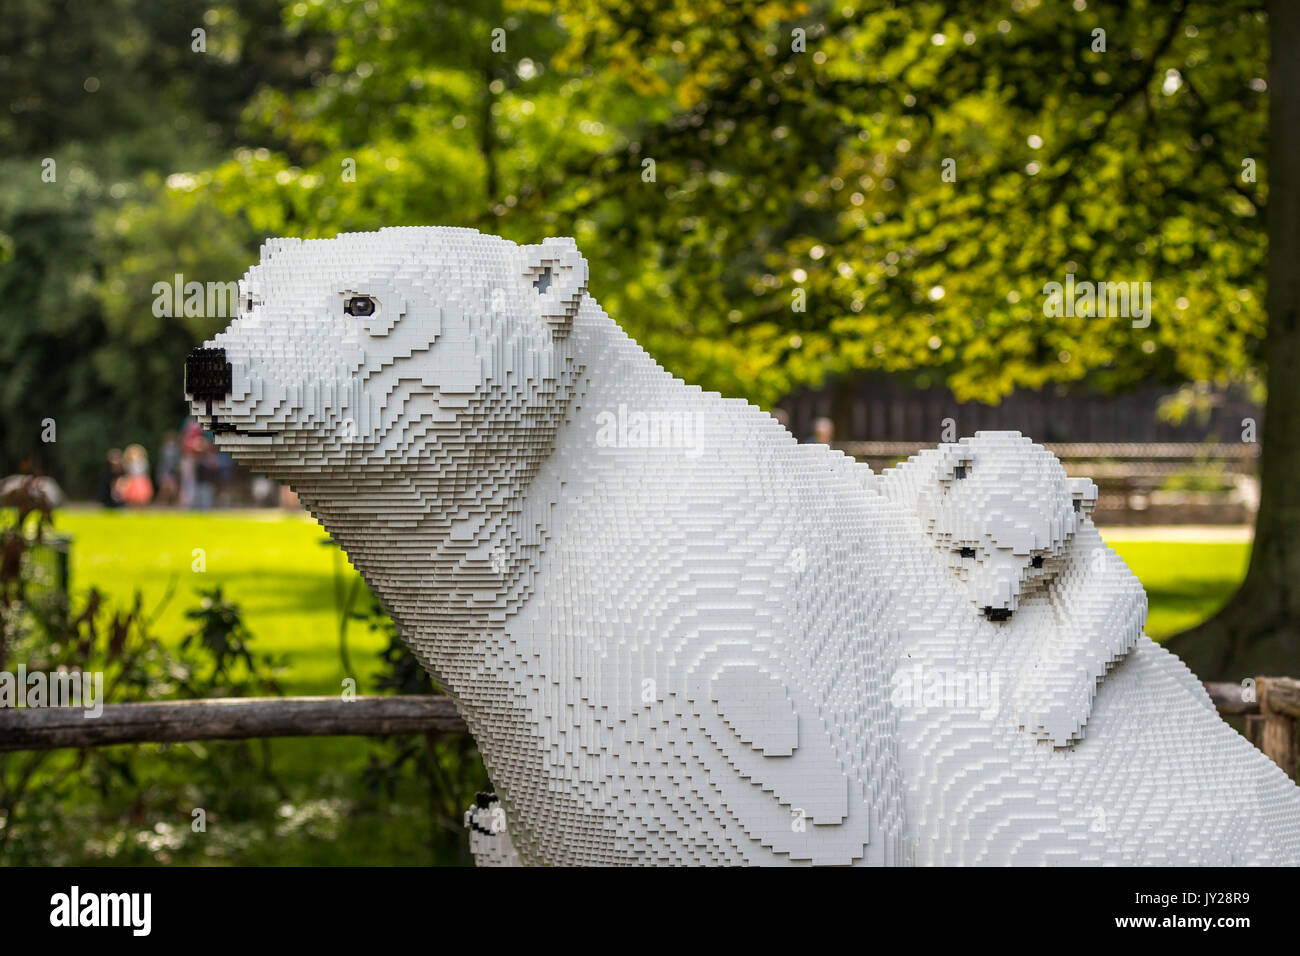 Planckendael zoo, Mechelen, Belgium - AUGUST 17, 2017 : White polar bear and baby bear from lego bricks in exhibition 'Nature Connects' by Sean Kenney Stock Photo